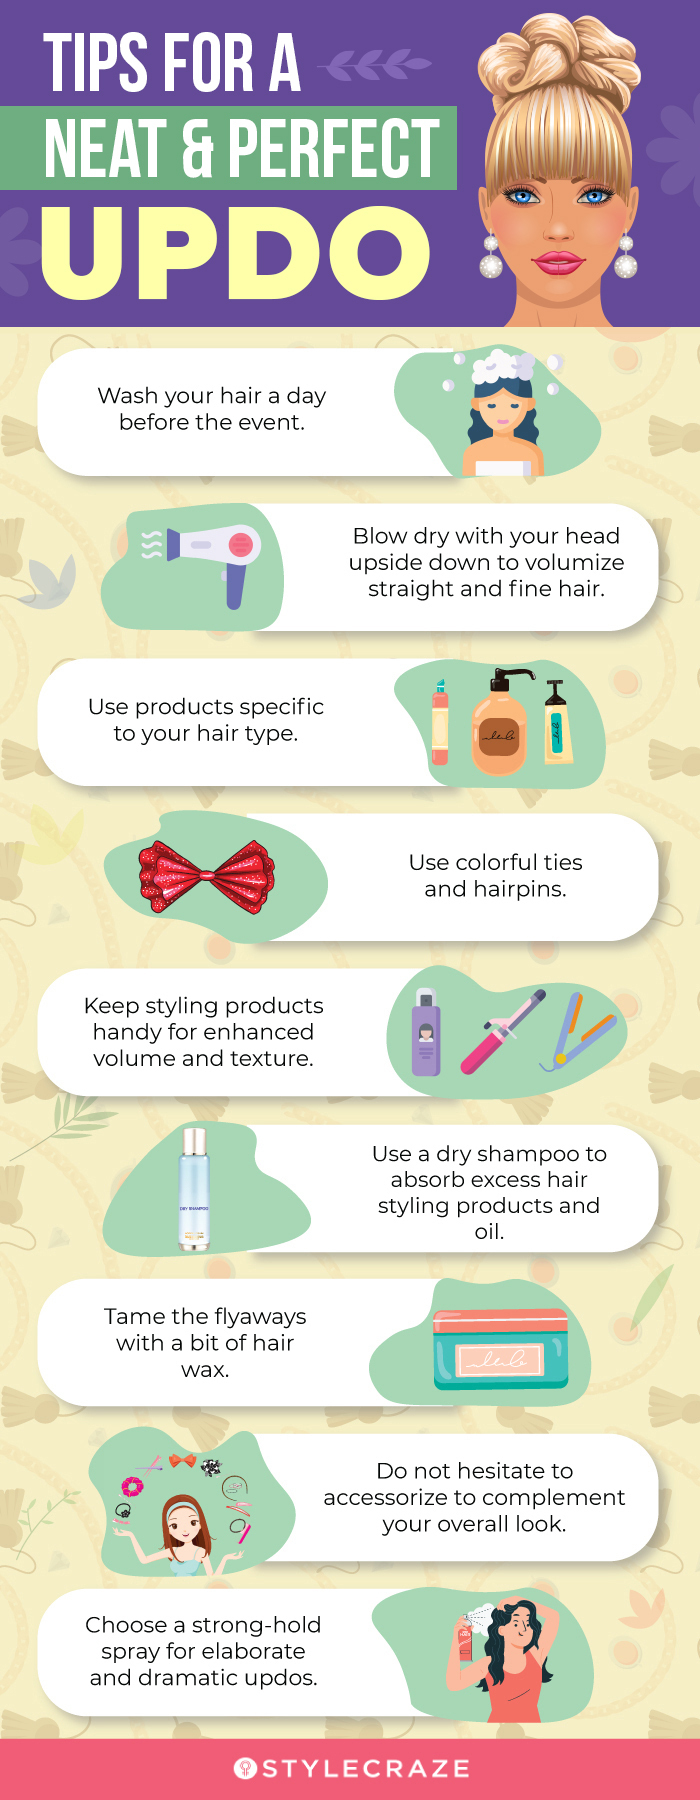 tips for a neat & perfect updo (infographic)